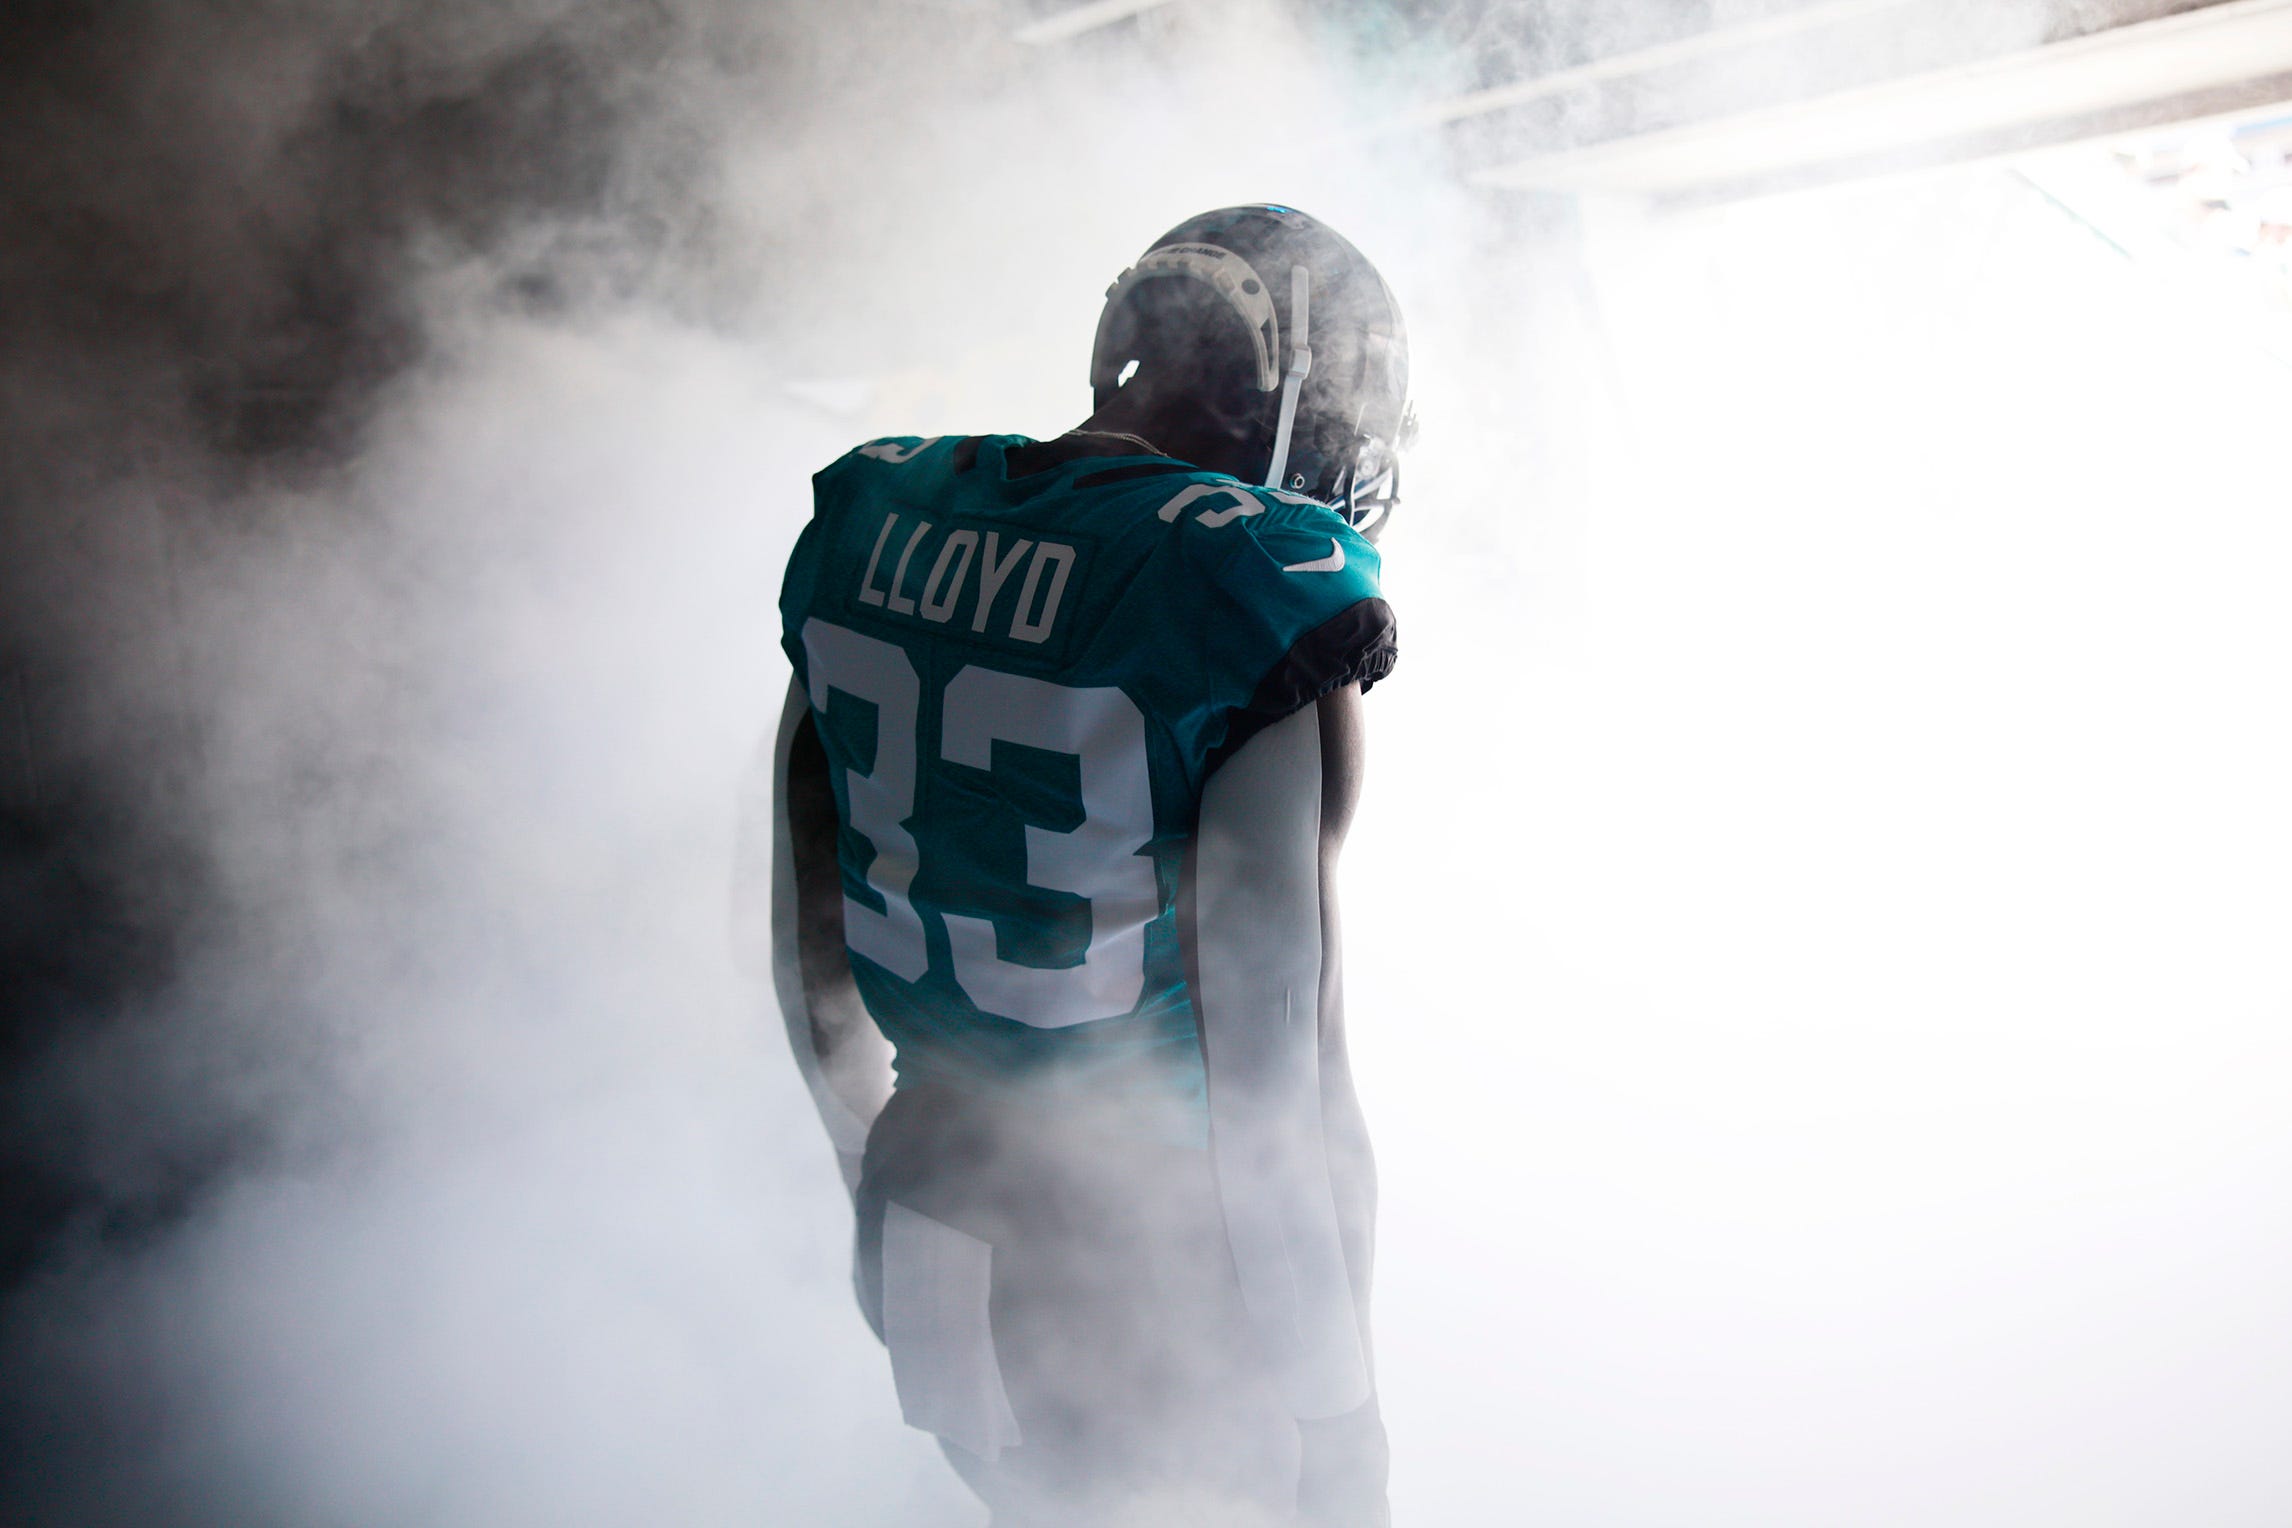 8dfa70d0-cf16-4039-b4c6-aed0c7c1b199-YIP_2022_36 'Fast and physical:' Jaguars LB Devin Lloyd looks to set new 'standard' for himself in 2023